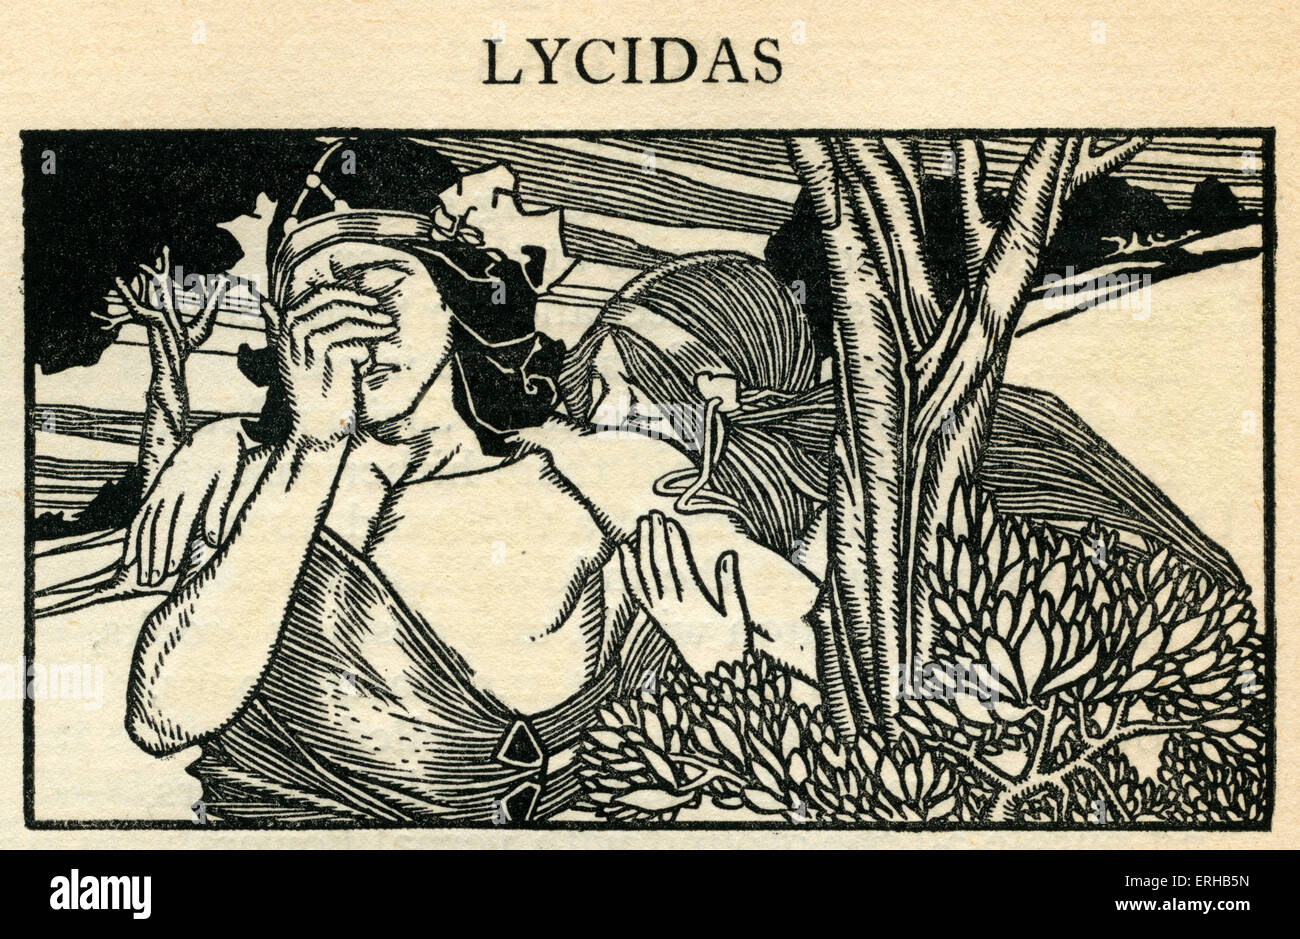 Lycidas by John Milton (1608-1674).Lycidas is a pastoral elegy published with Milton's 1638 Poems, dedicated to the memory of Stock Photo